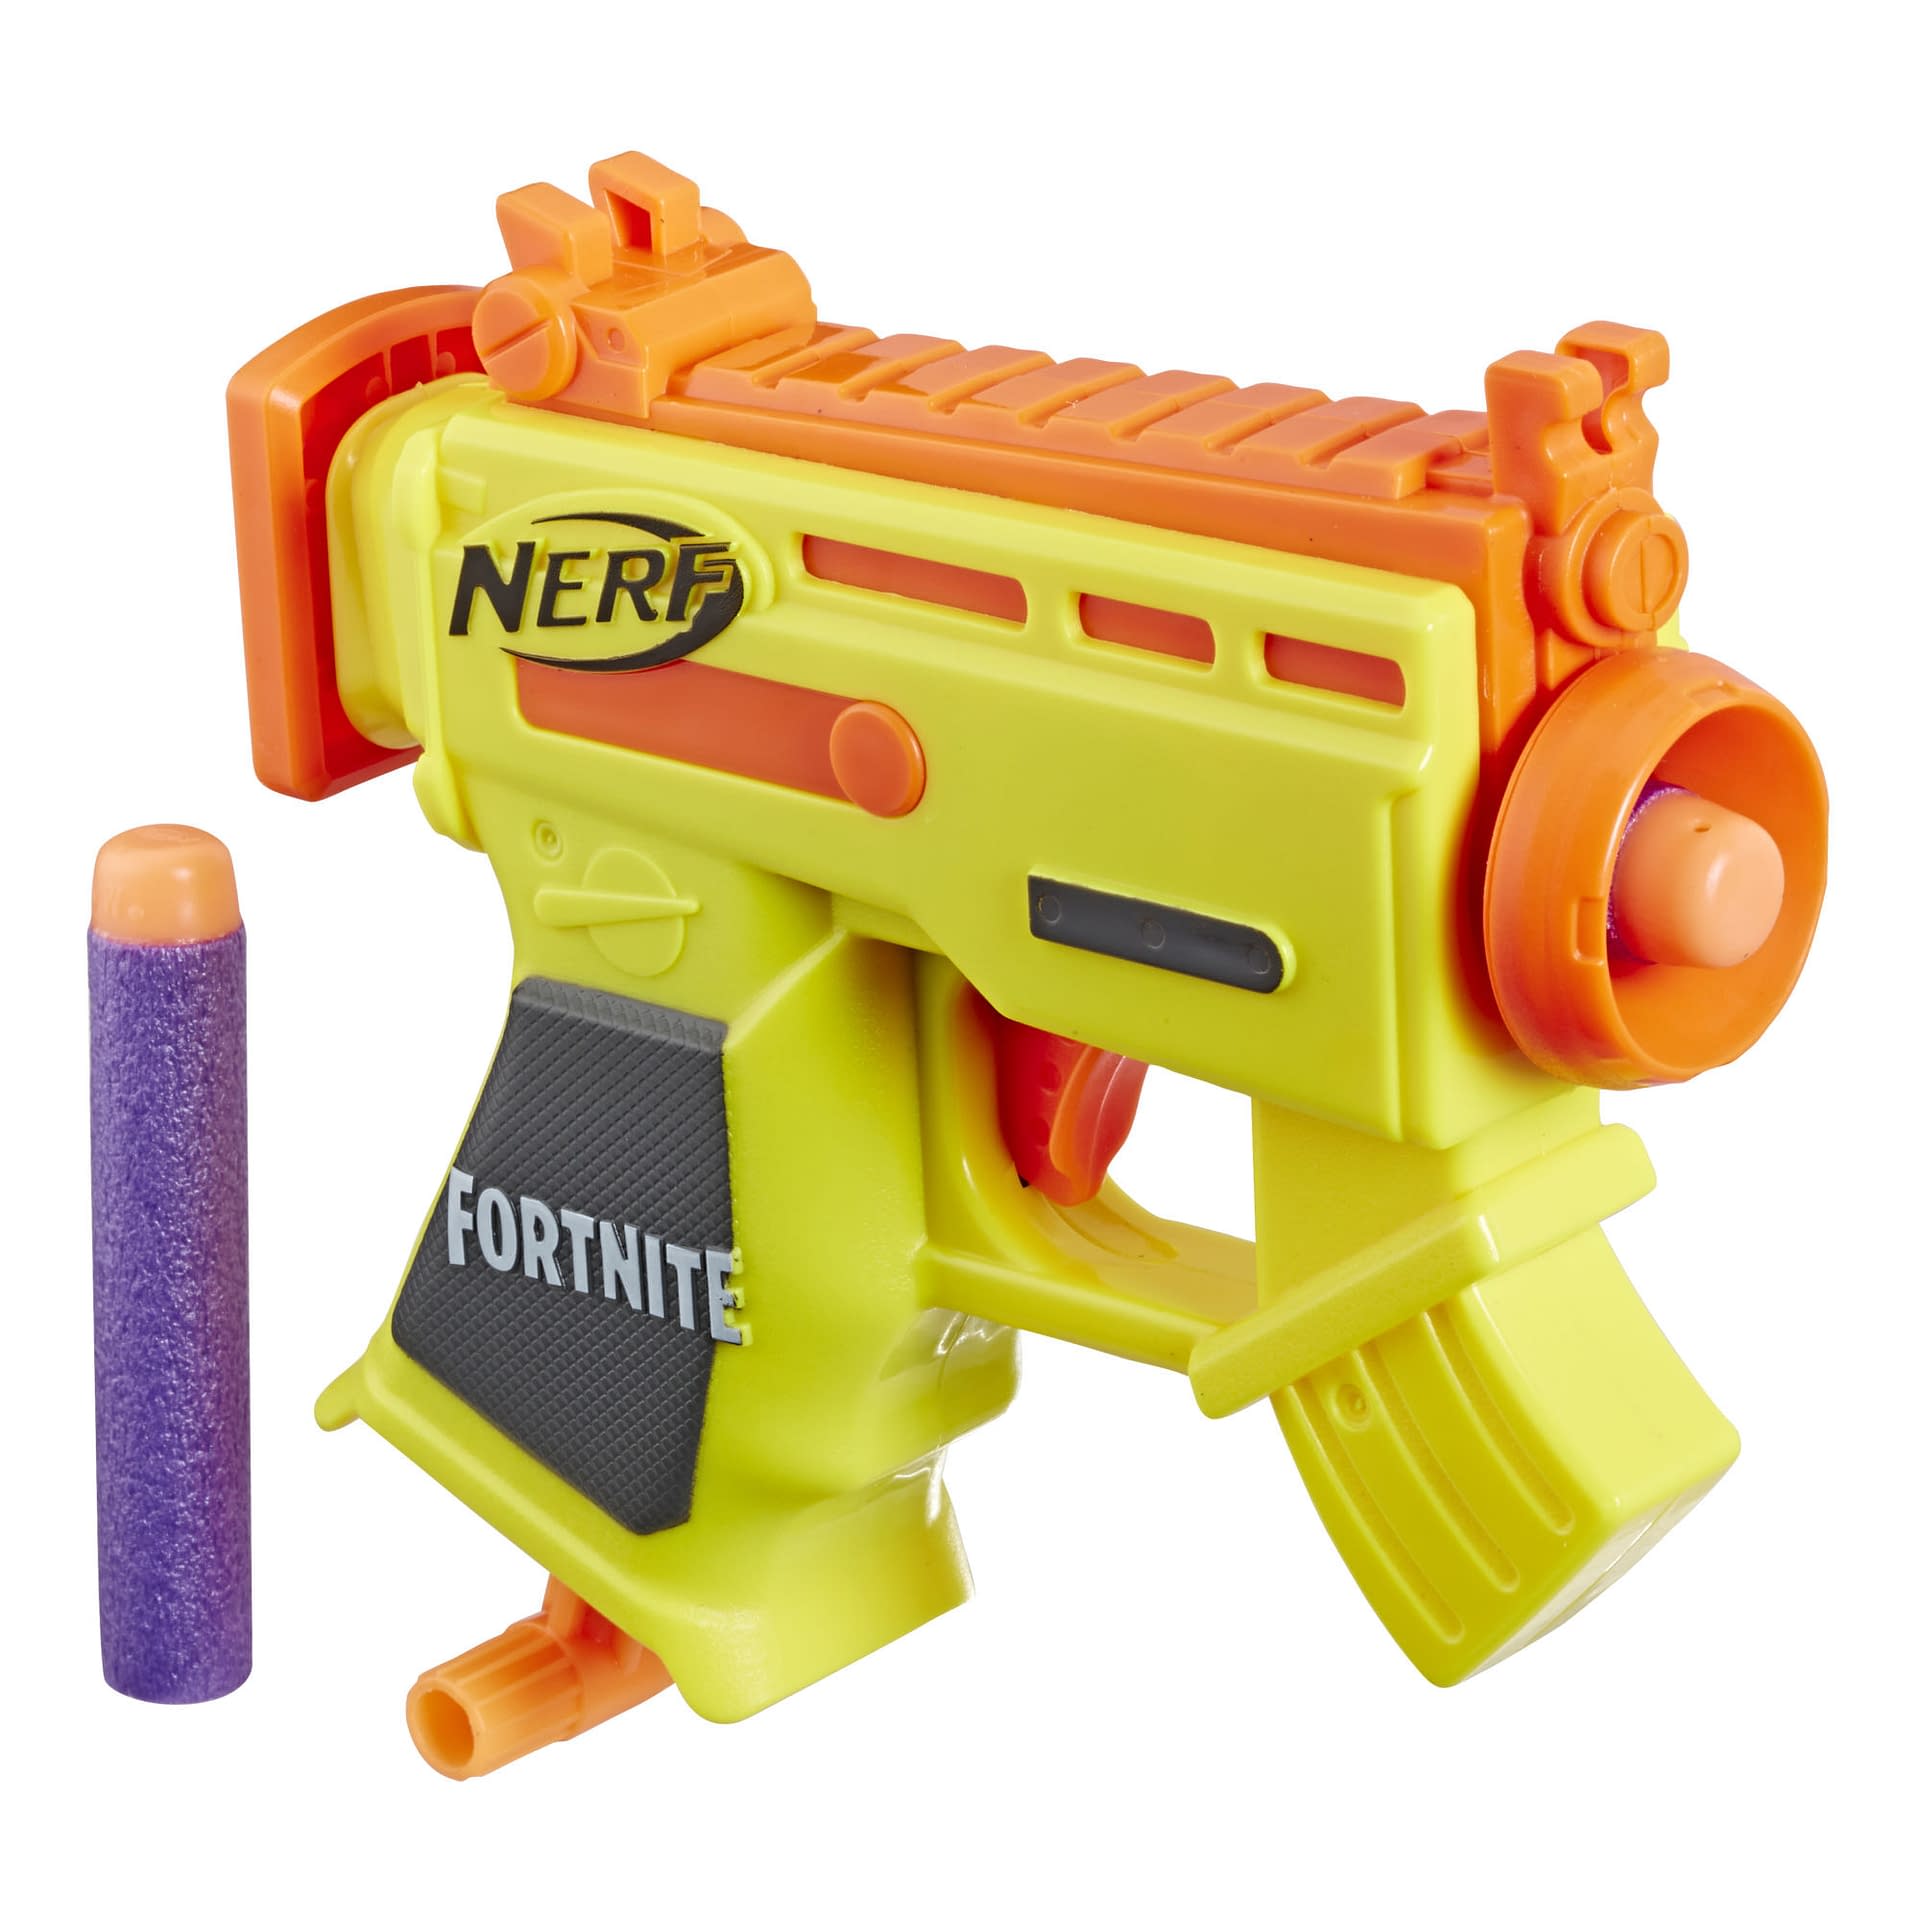 Fortnite: New Nerf Blasters Coming in the Fall!